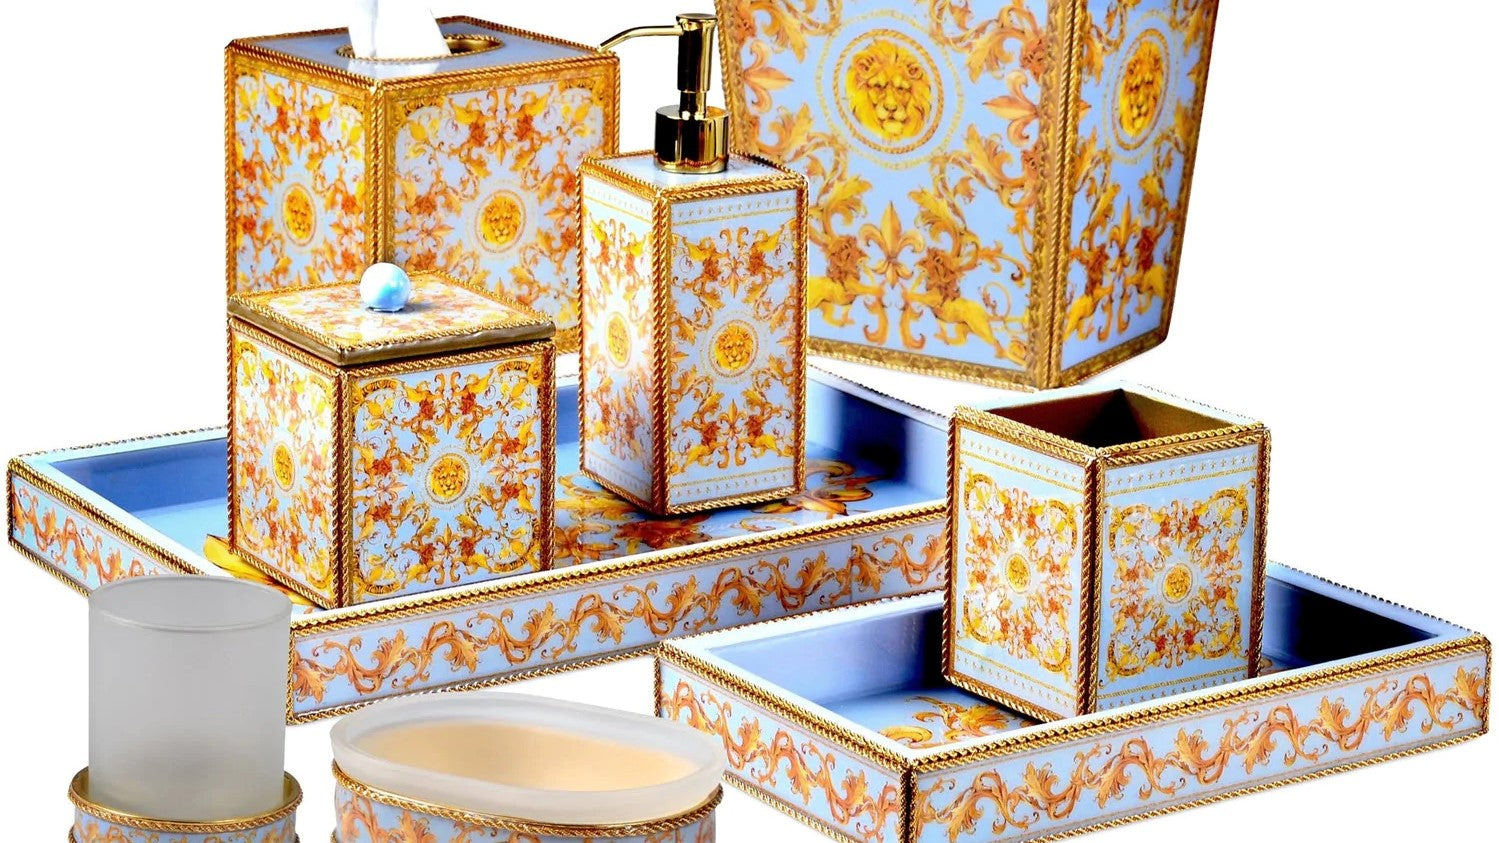 New Luxury Bathroom Accessories from Mike+Ally Boxes and Holders